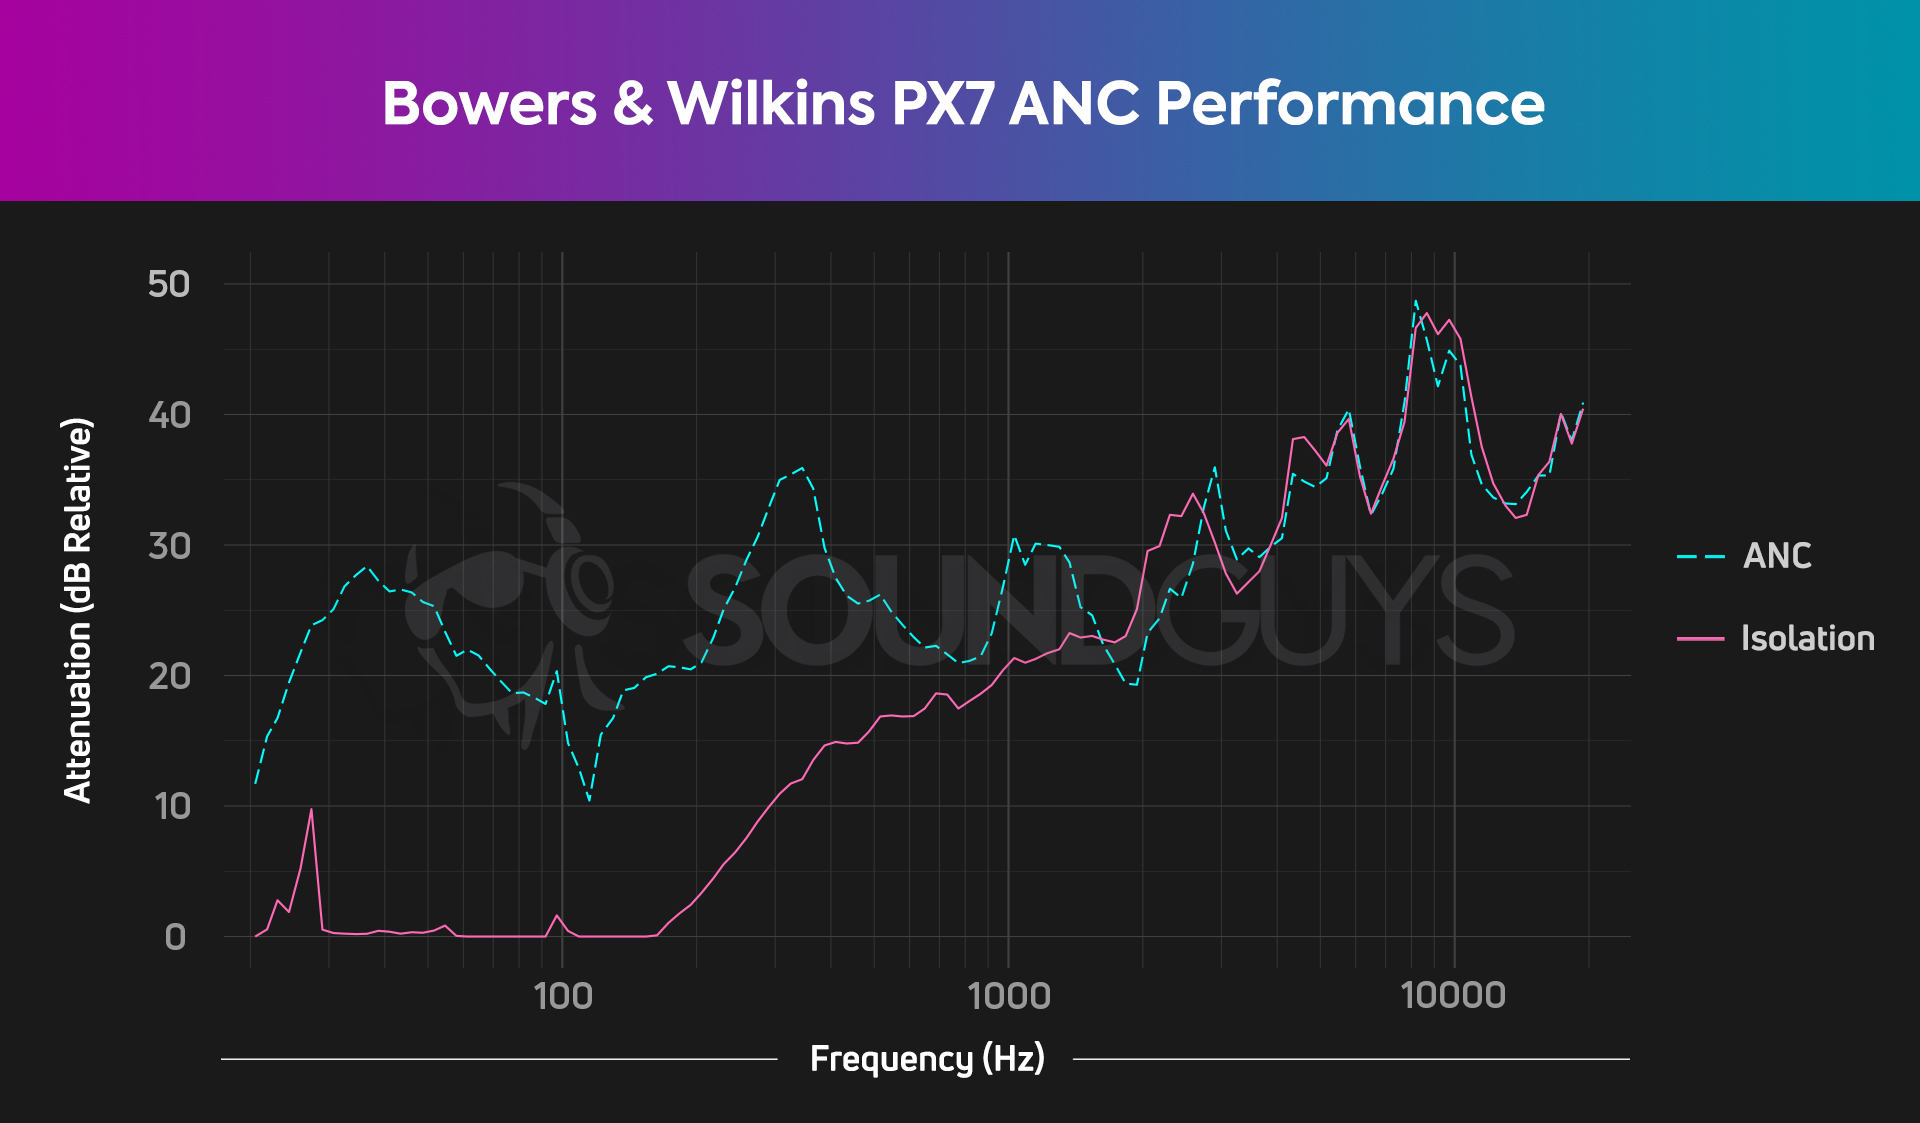 A plot showing the very excellent isolation and ANC performance of the Bowers and Wilkins PX7.